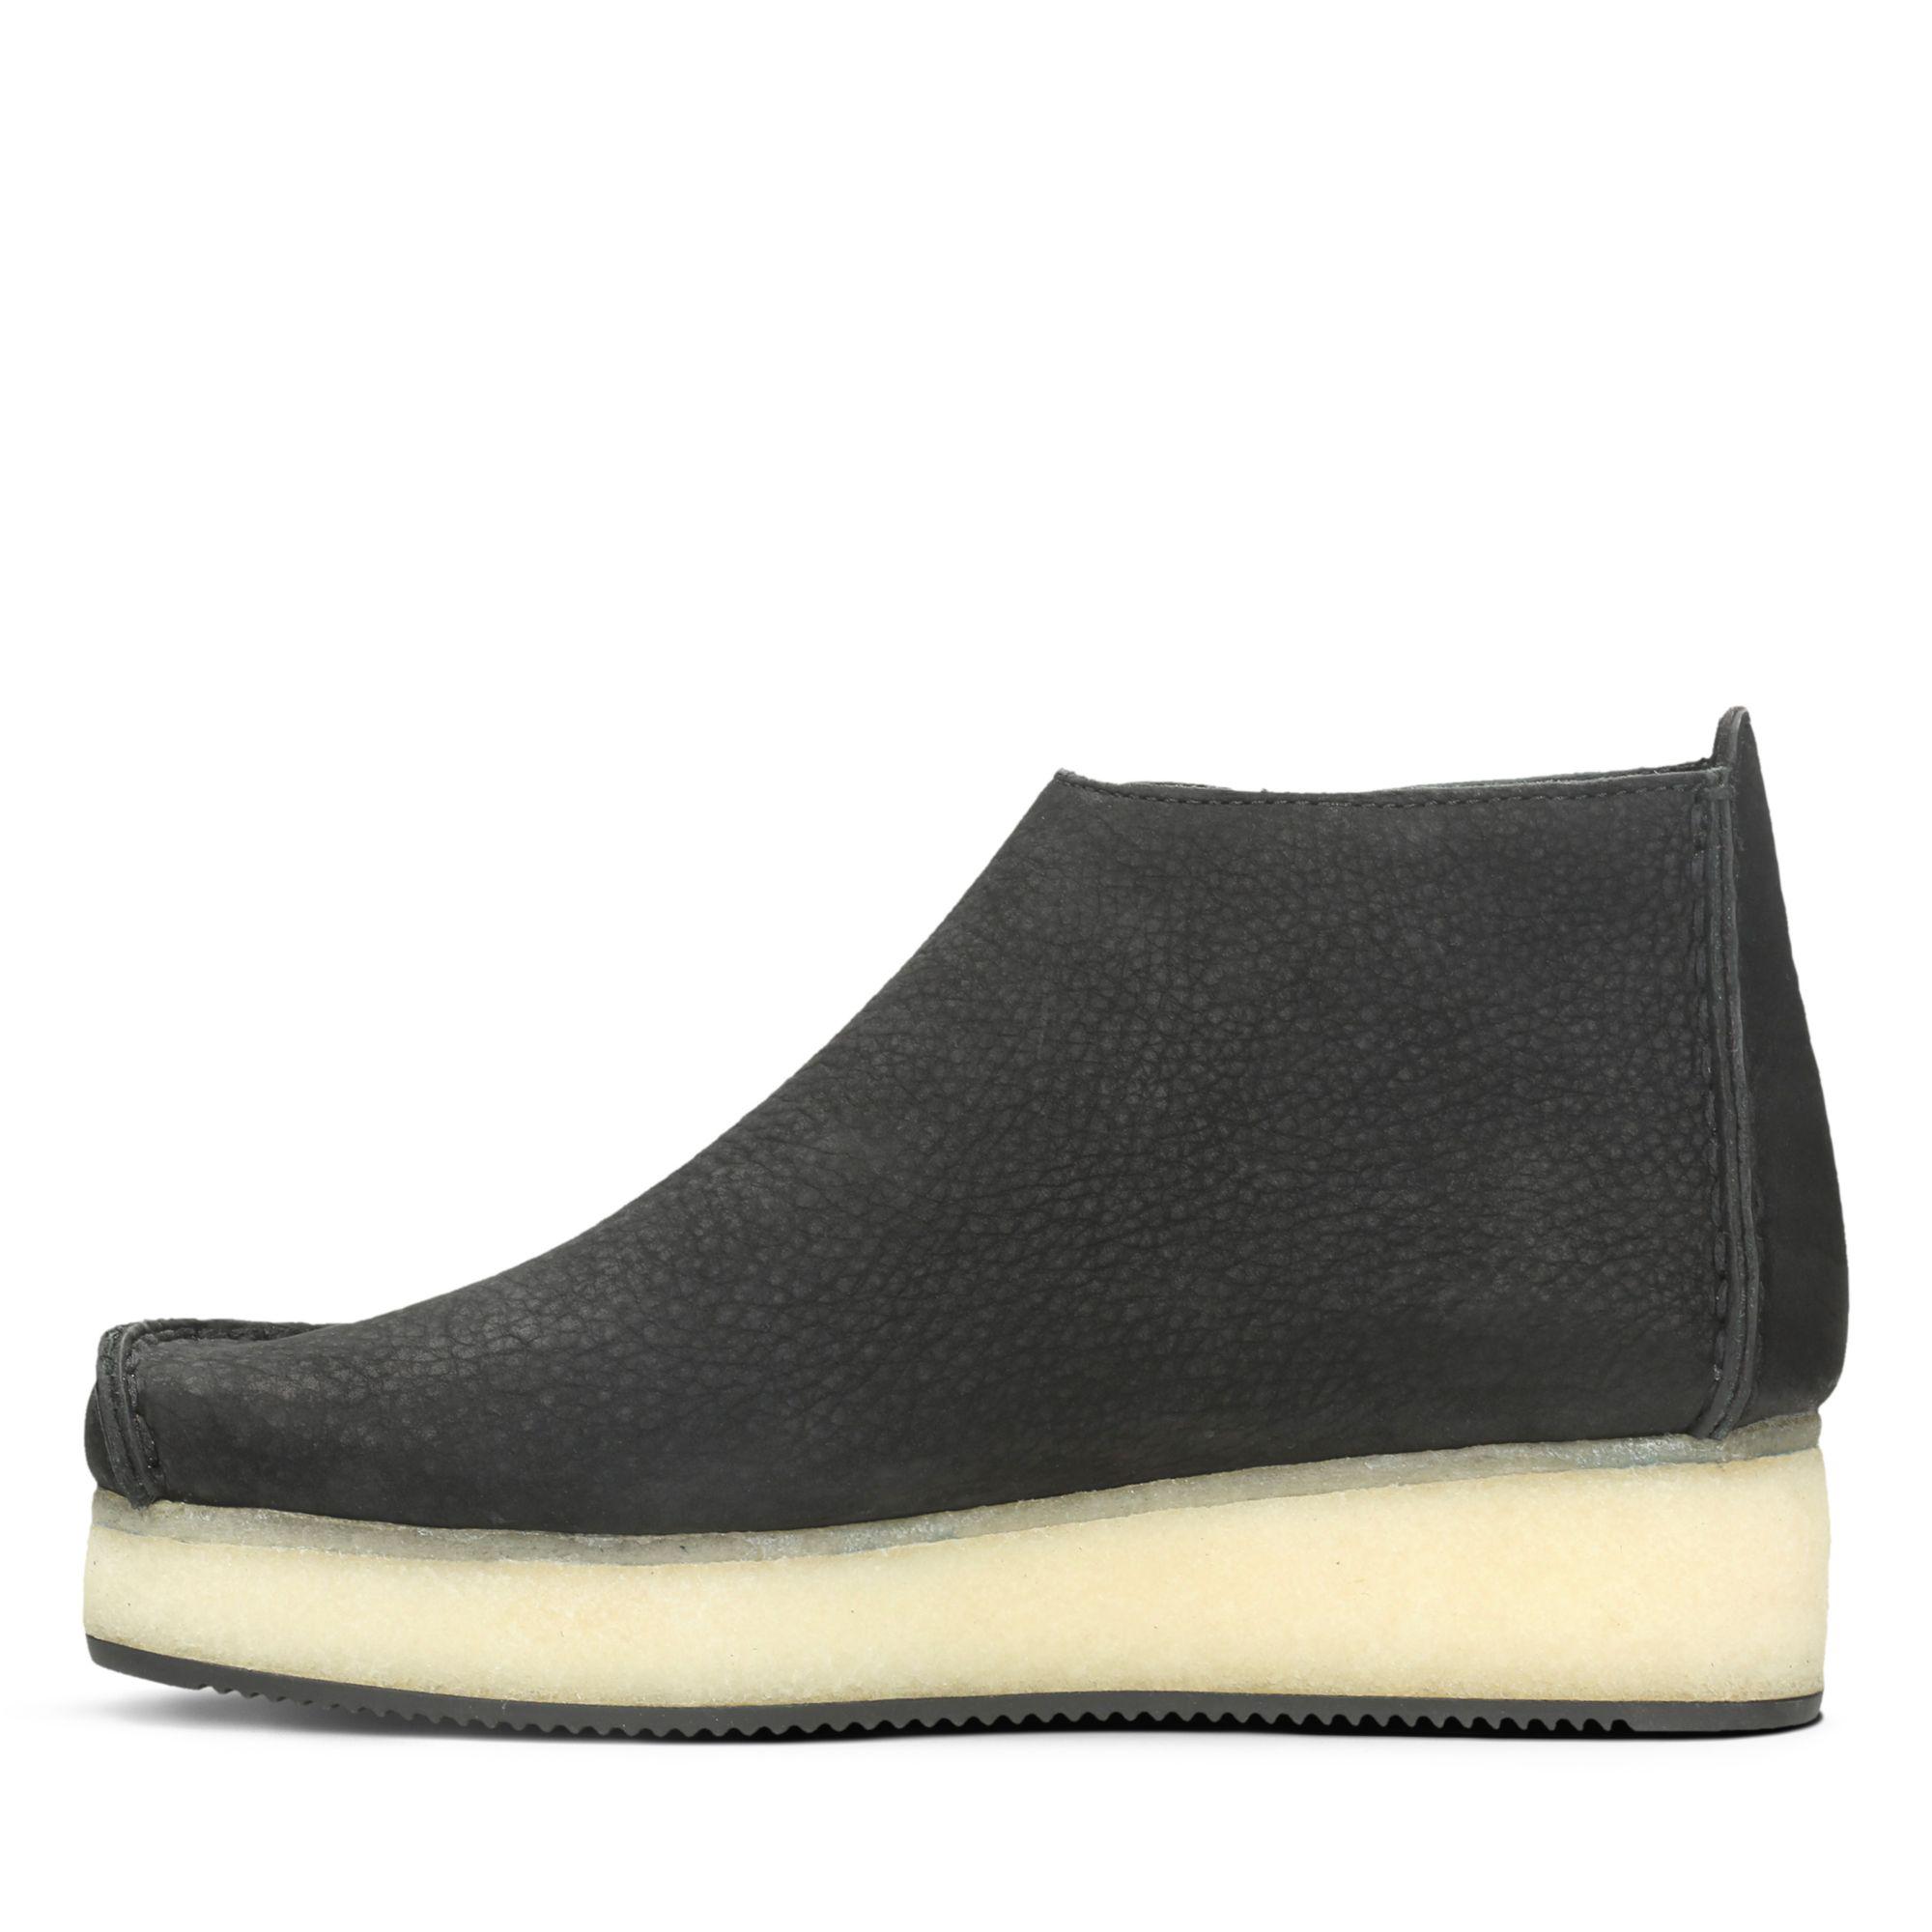 Clarks Lace Lugger Wedge in Black 